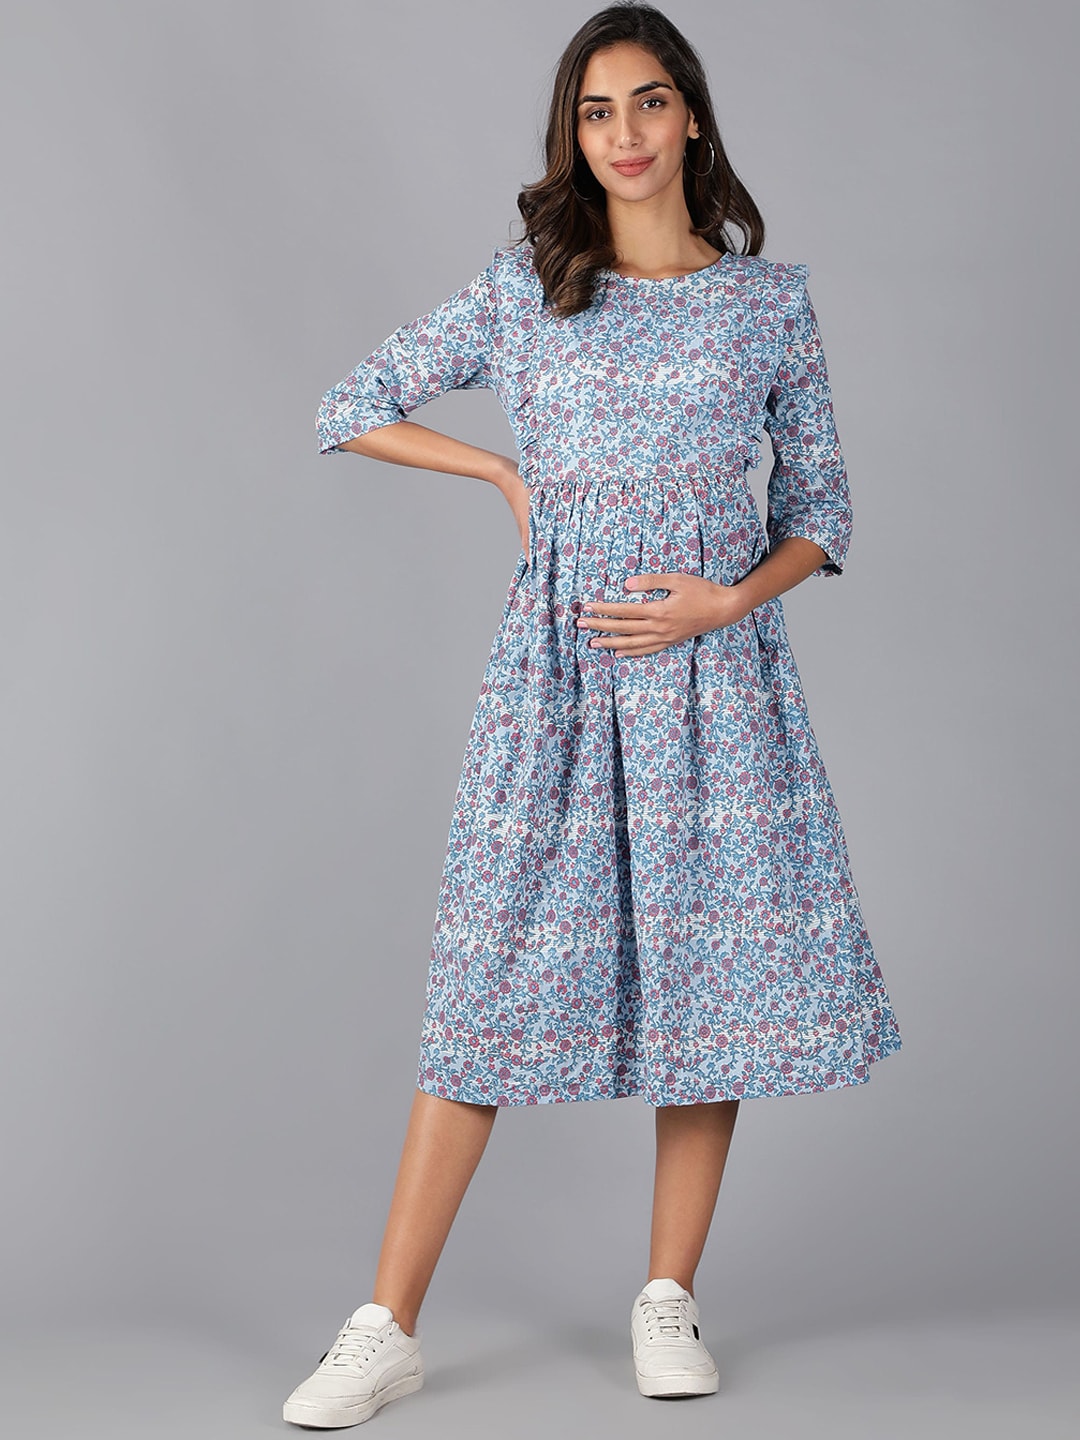 Cot'N Soft Floral Maternity Cotton Dress Price in India